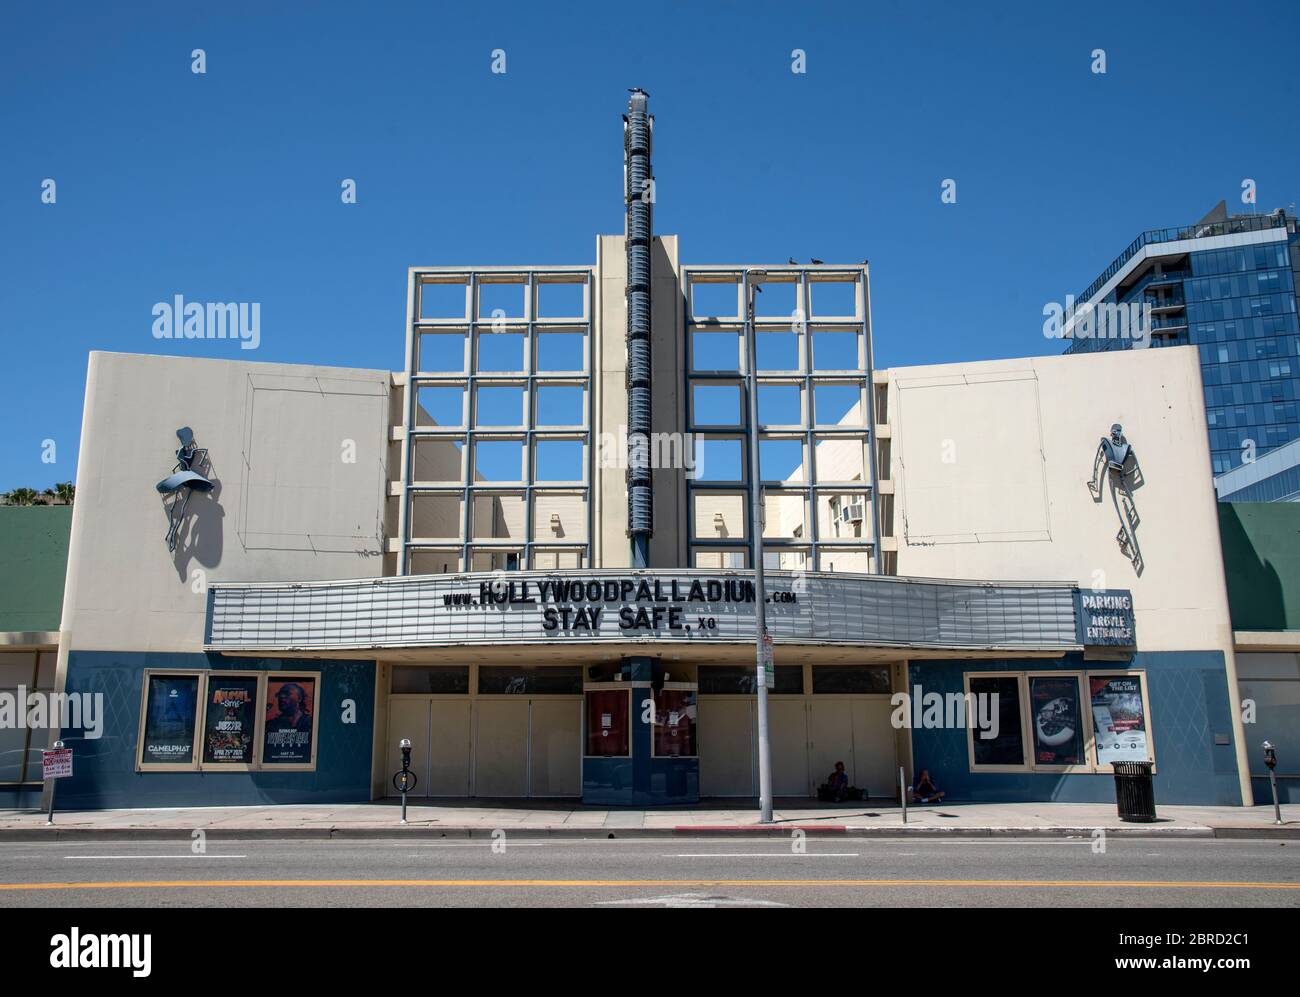 Hollywood, CA/USA - May 4, 2020: The Hollywood Palladium Theatre, a historic landmark, is deserted except for homeless people during coronavirus quara Stock Photo